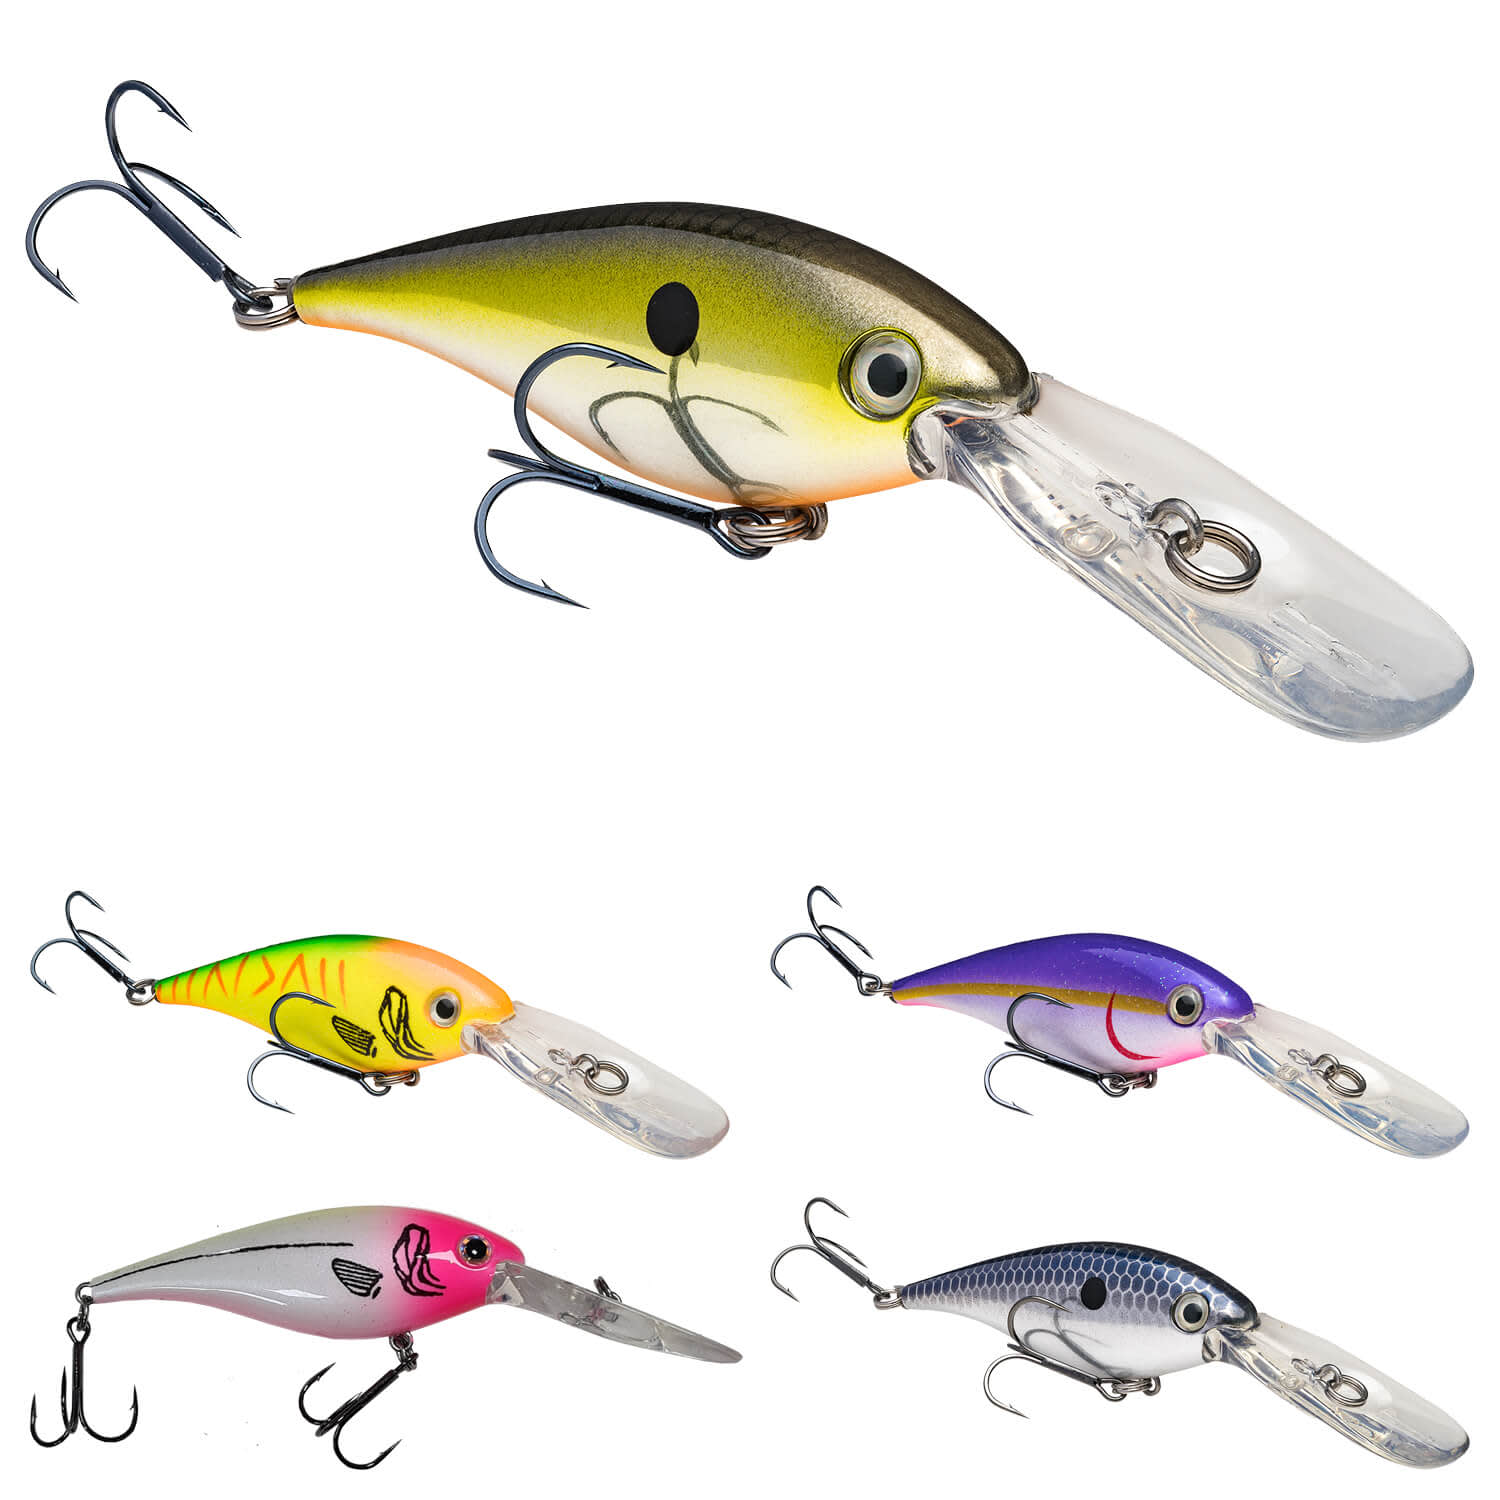 https://koeder-laden.mo.cloudinary.net/out/pictures/master/product/1/strike-king-lucky-shad-walleye-wobbler-alle-1.jpg